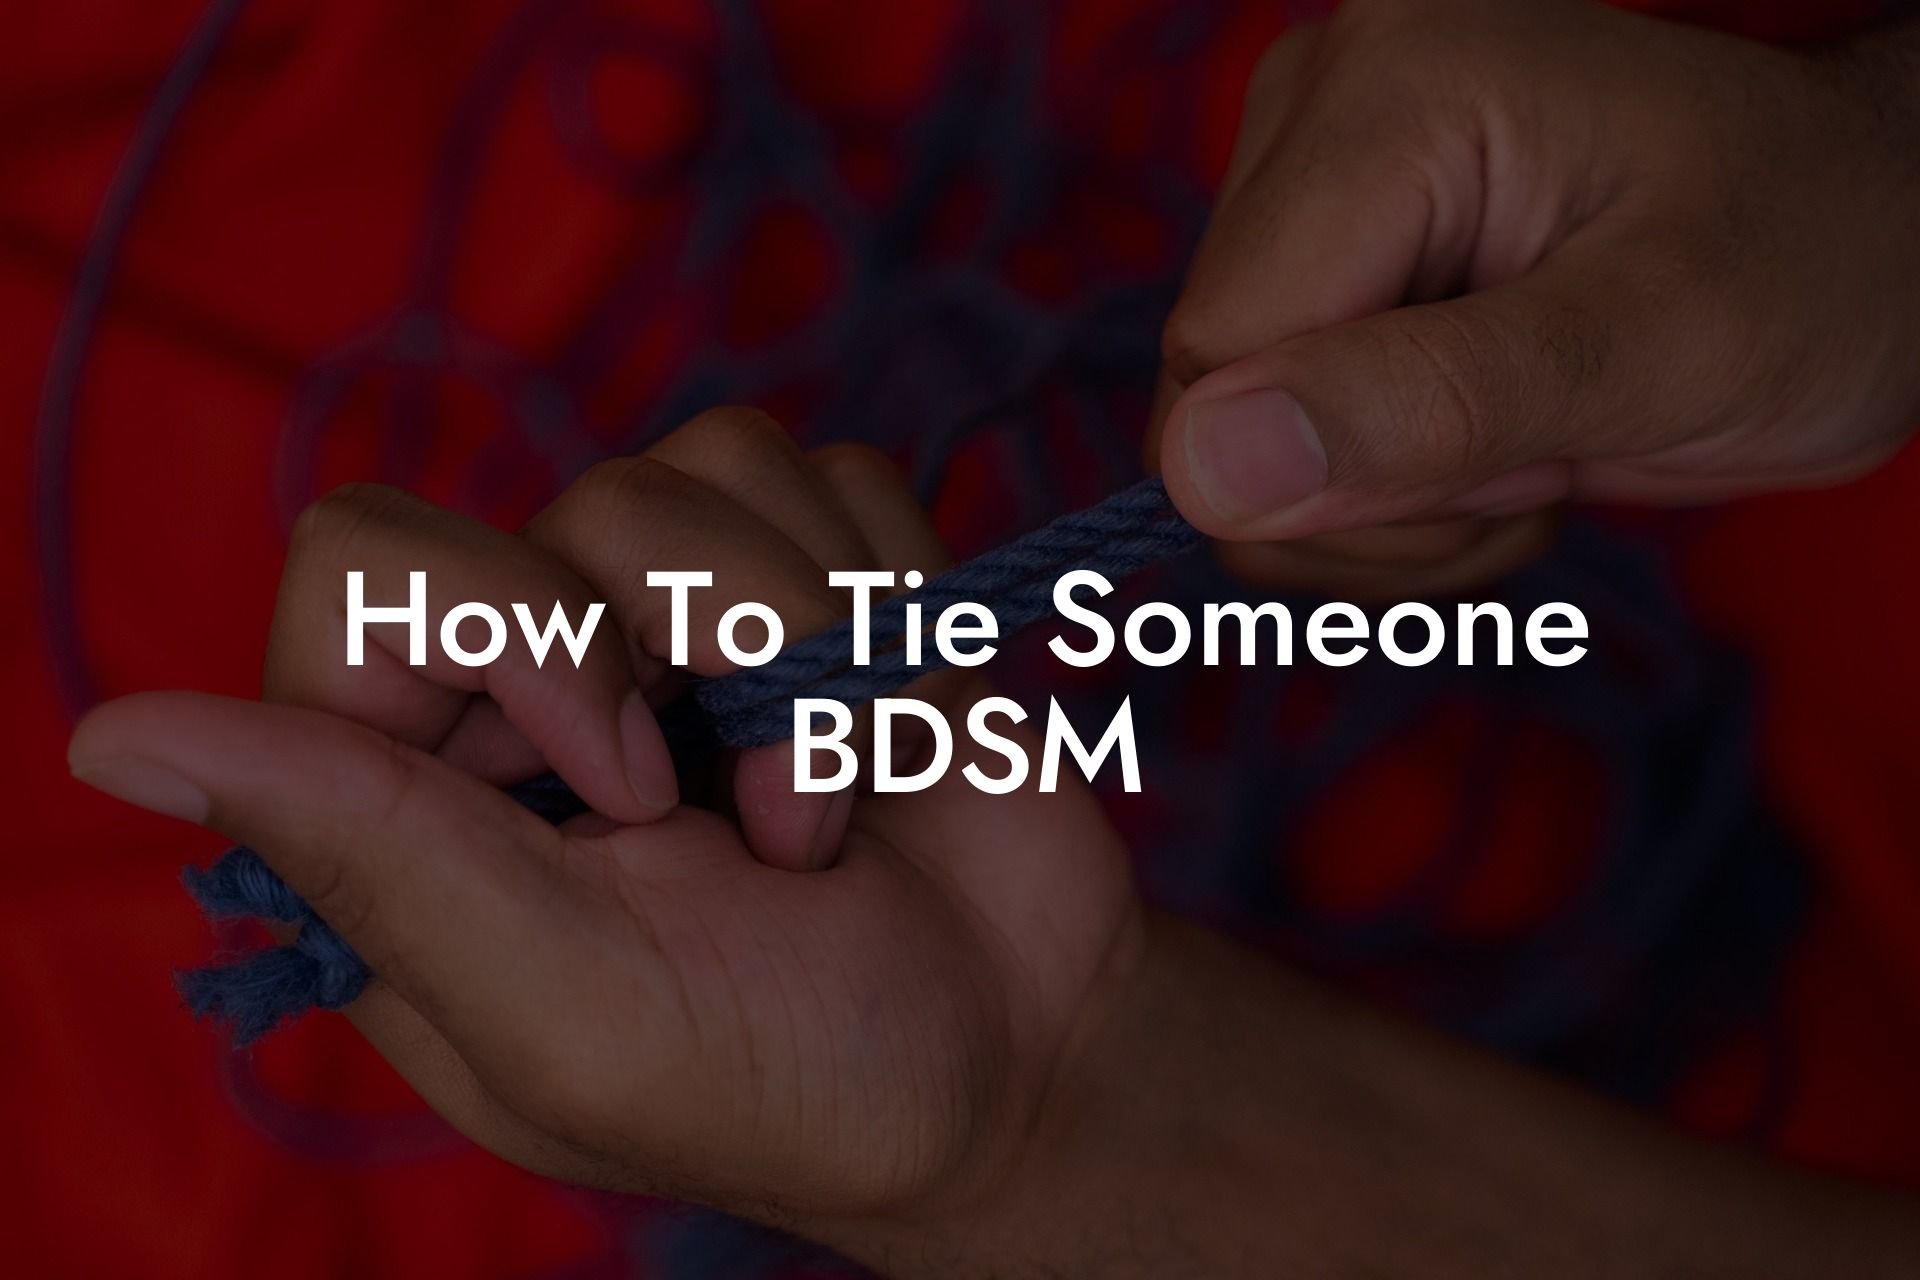 How To Tie Someone BDSM